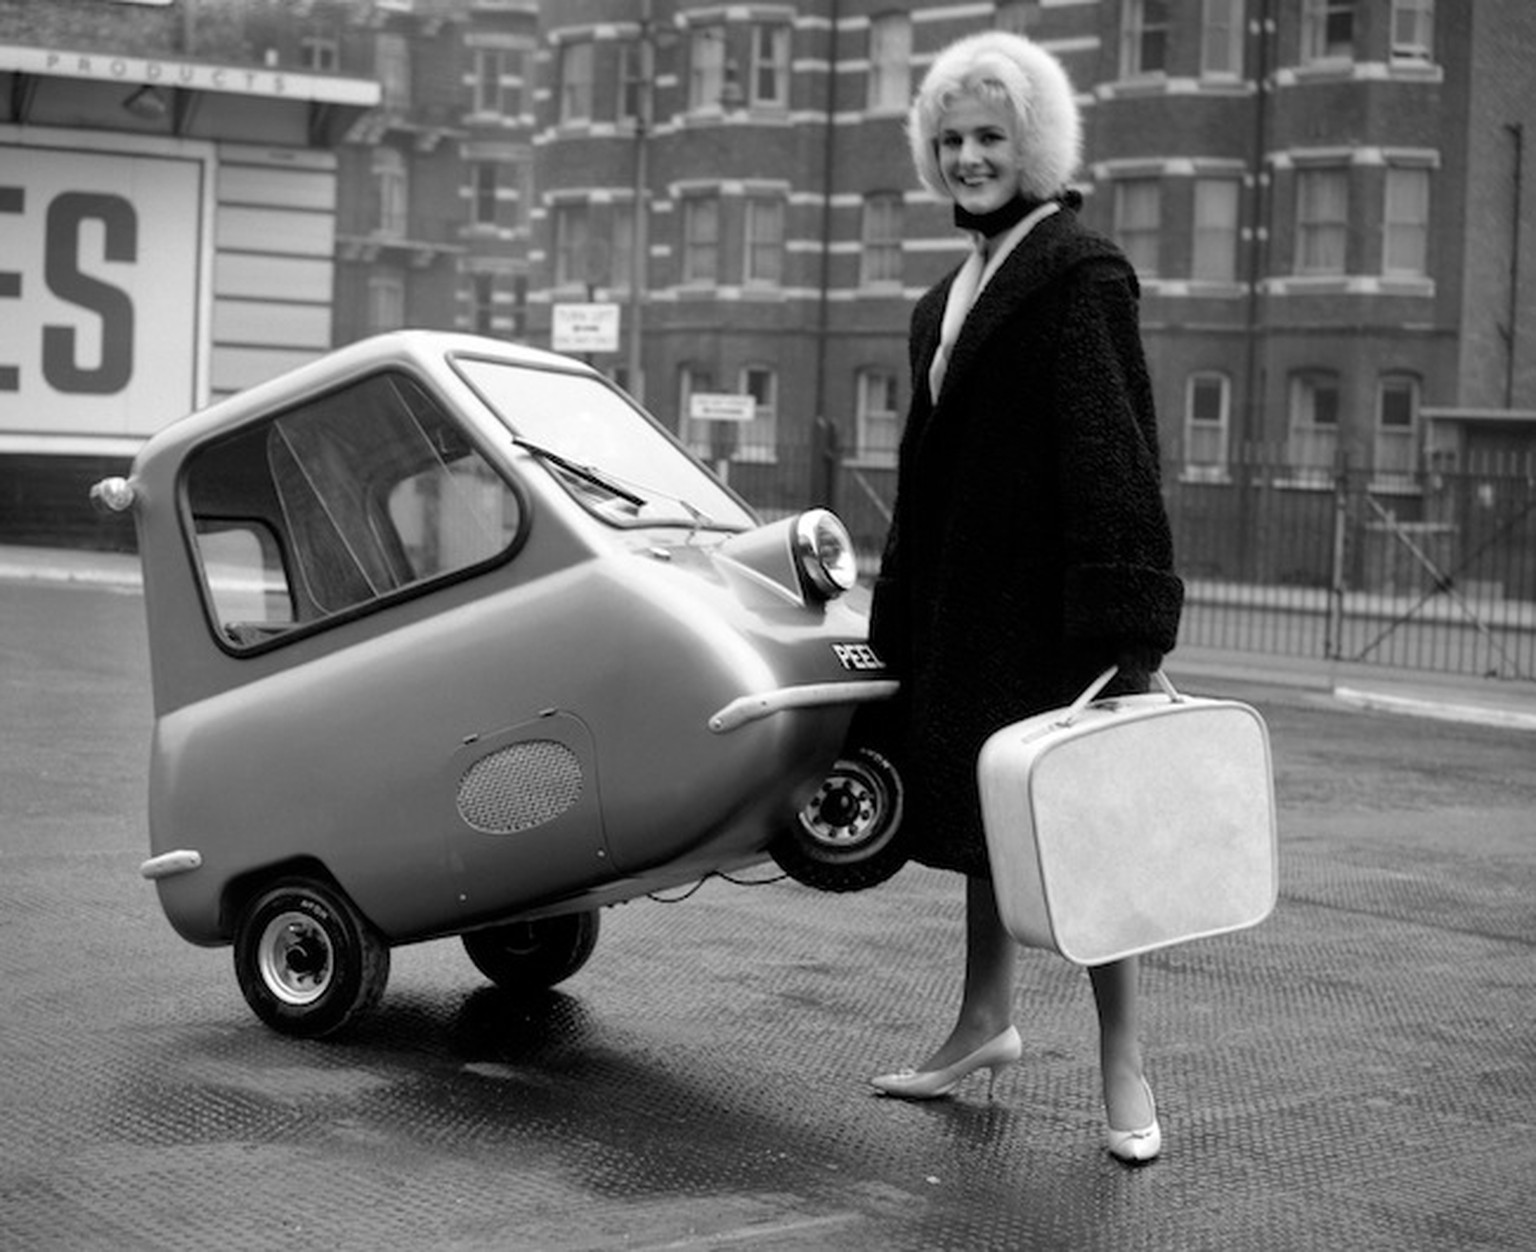 peel p50 microcar http://flashbak.com/the-peel-p50-car-was-made-for-pulling-11279/